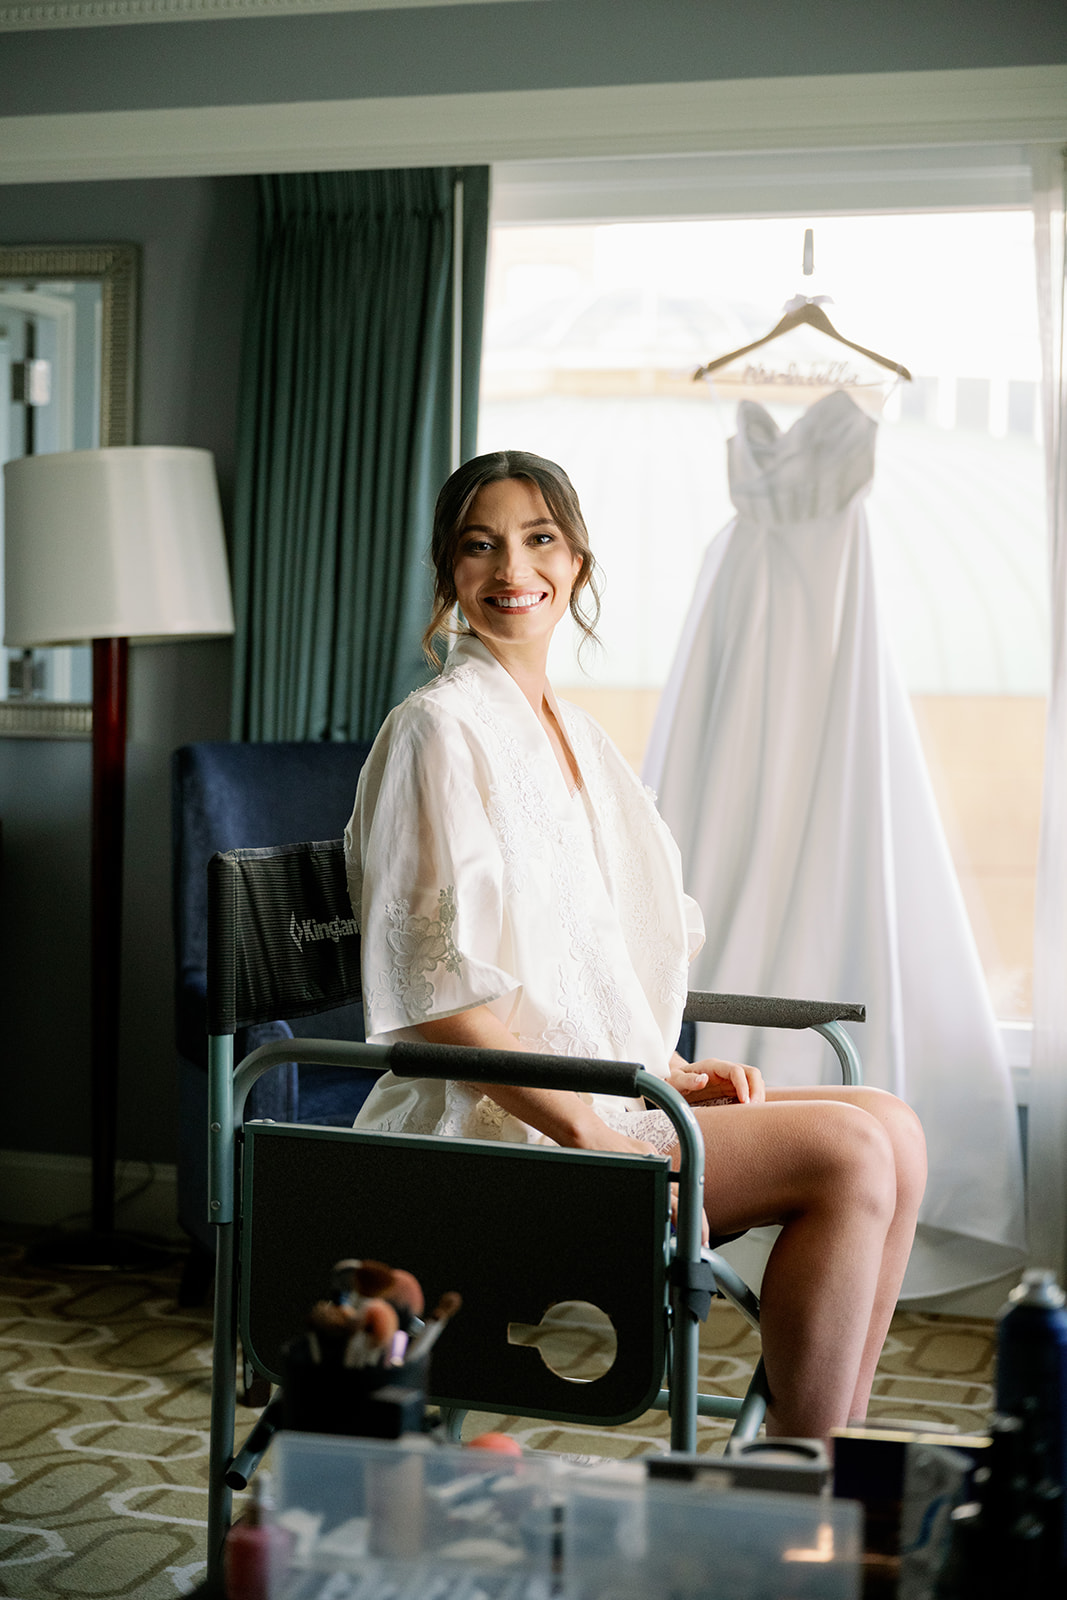 Bride in a custom white getting ready robe smiling after getting her hair and makeup done.